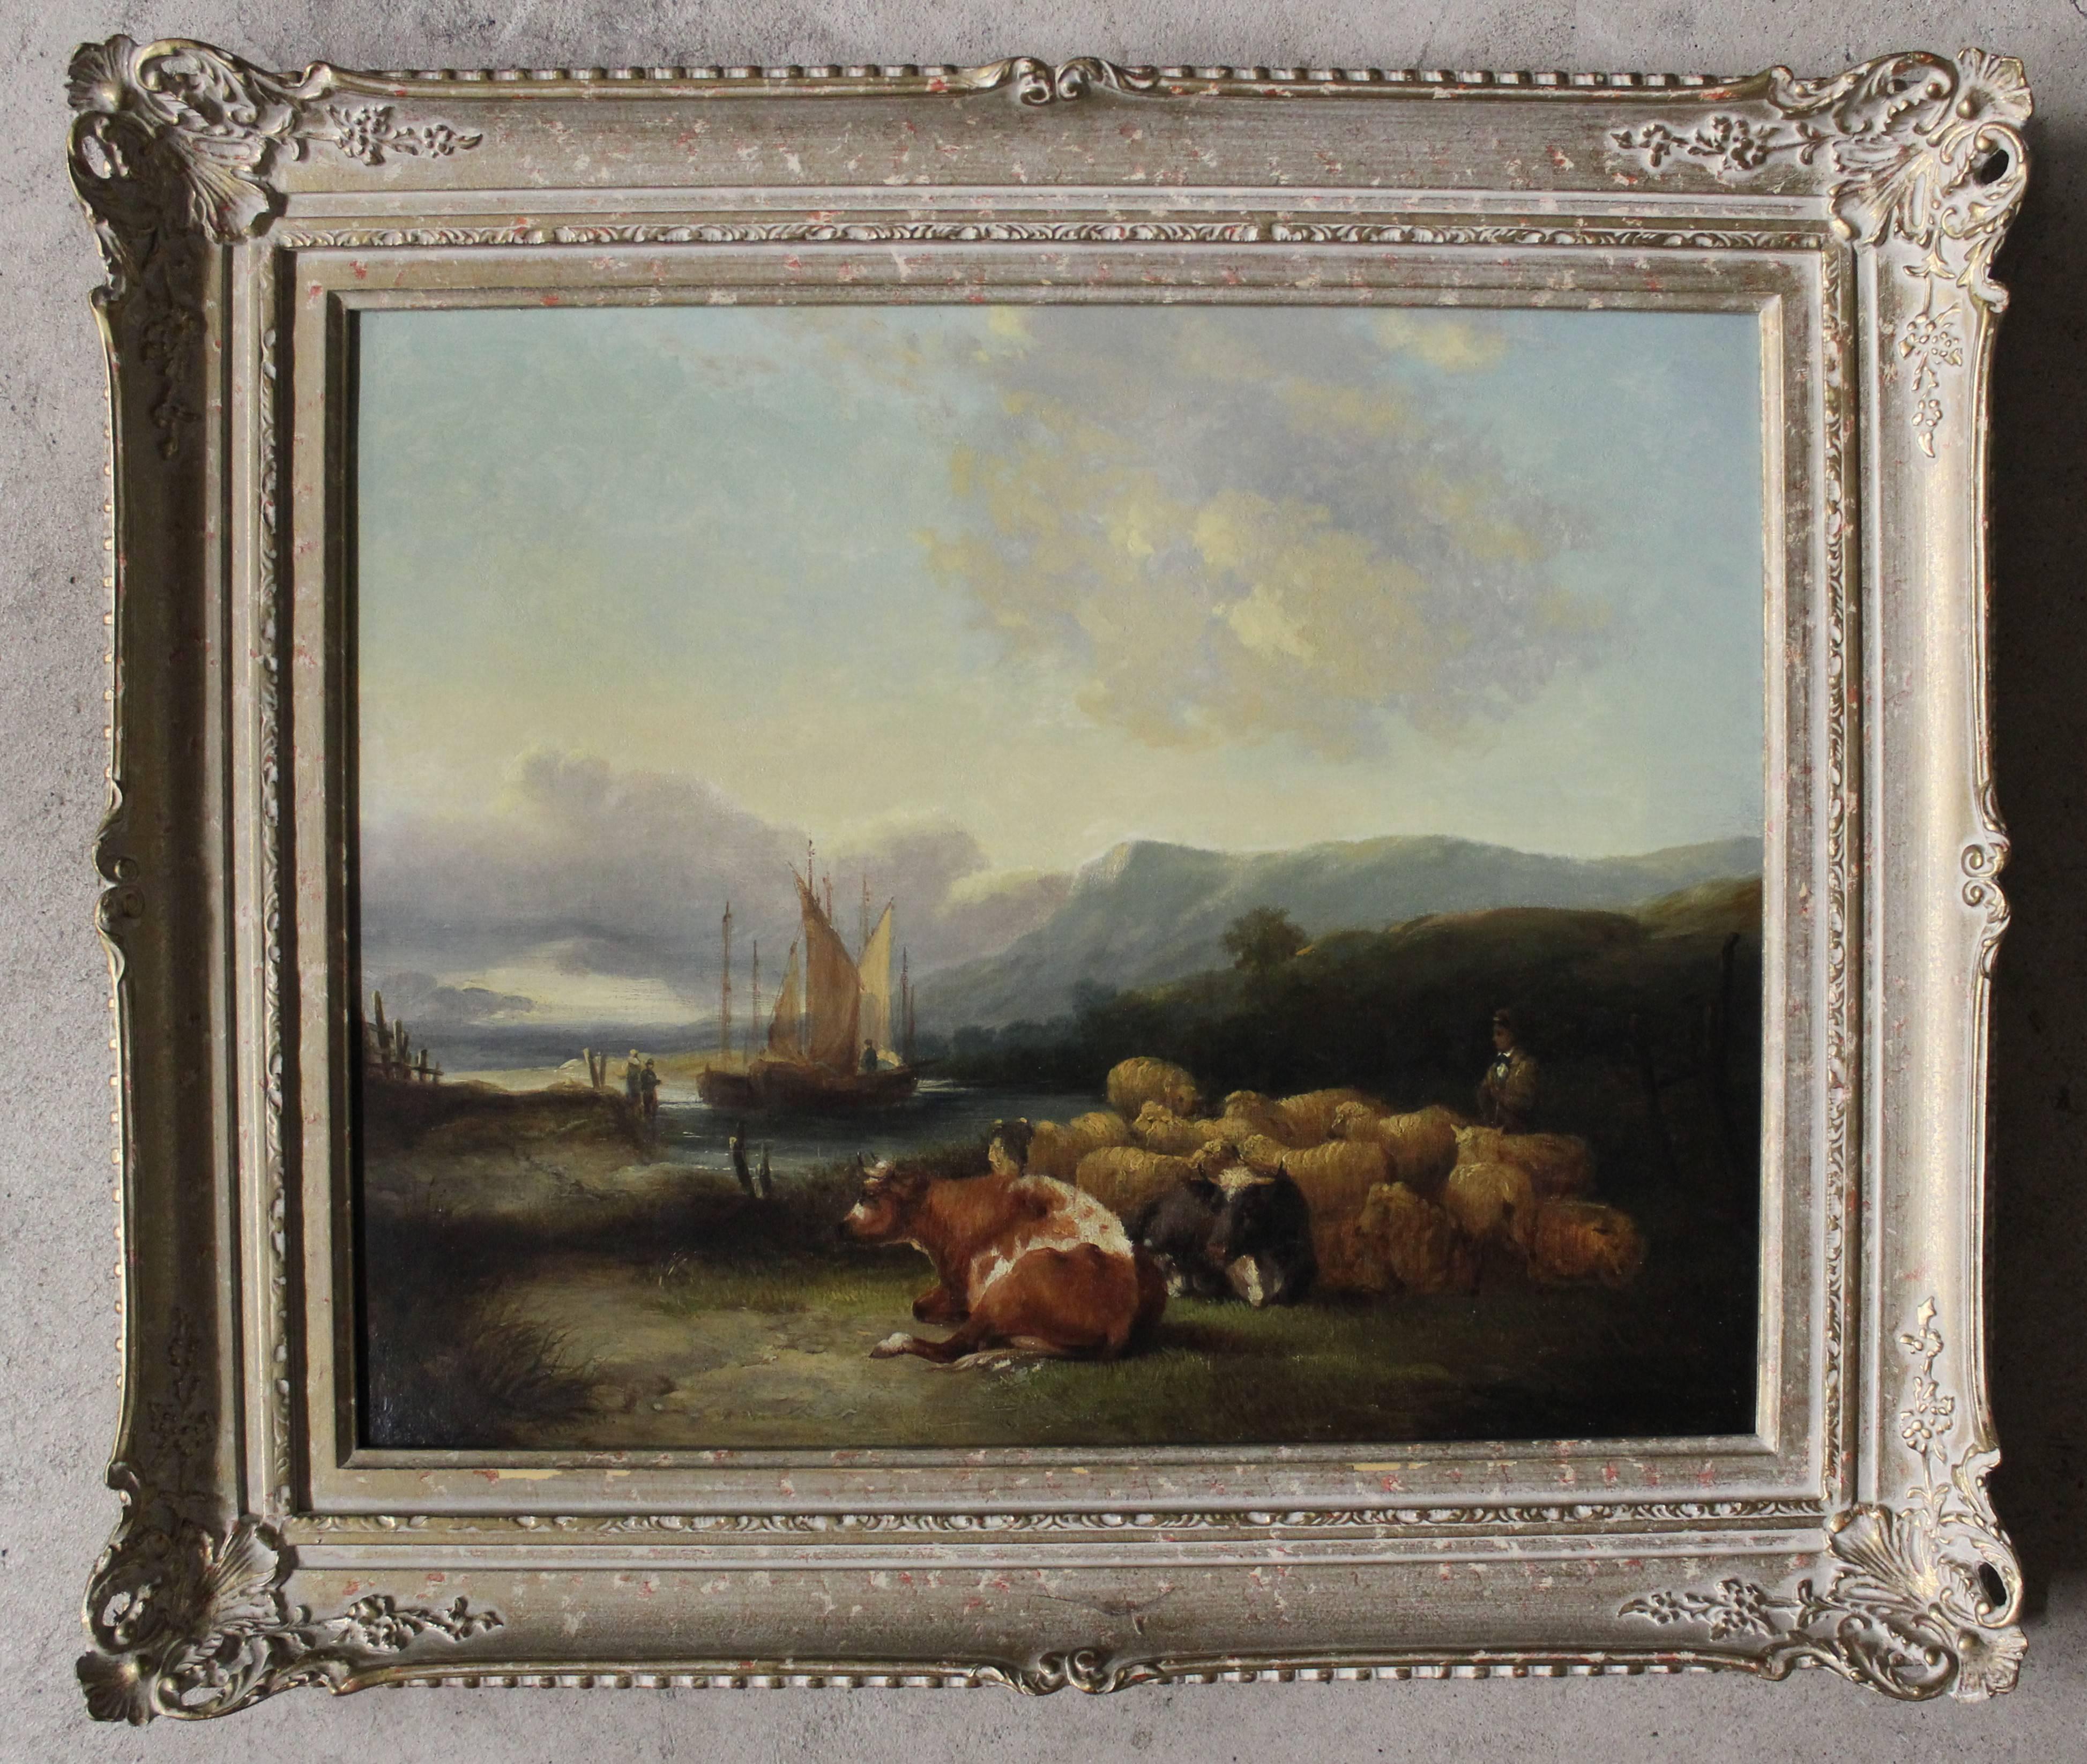 William Shayer oil painting (English 1787-1879) 
Size without frame: 18" high x 22 1/2" wide
Size with Frame: 23 1/4" high x 27 1/4" wide

Biography 
William Joseph Shayer, senior was a self-taught artist, who began by